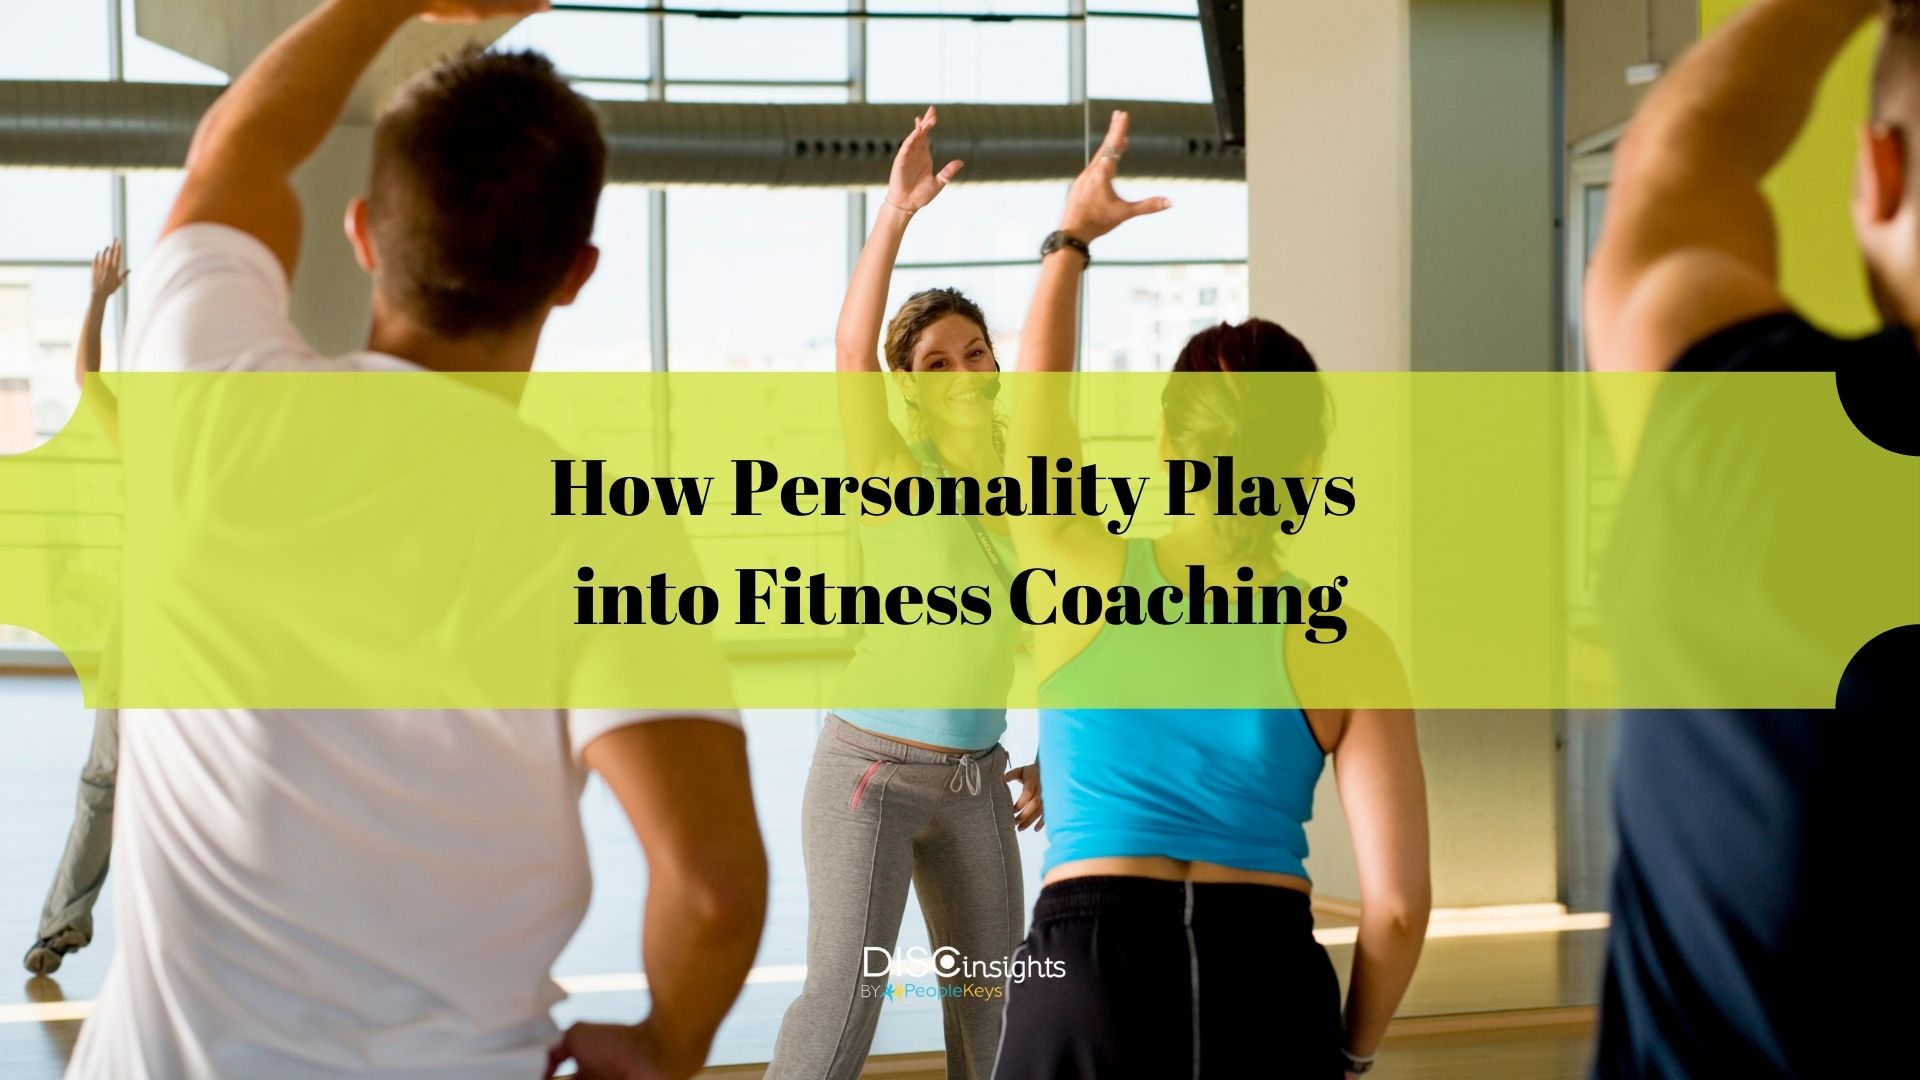 How personality plays into fitness coaching